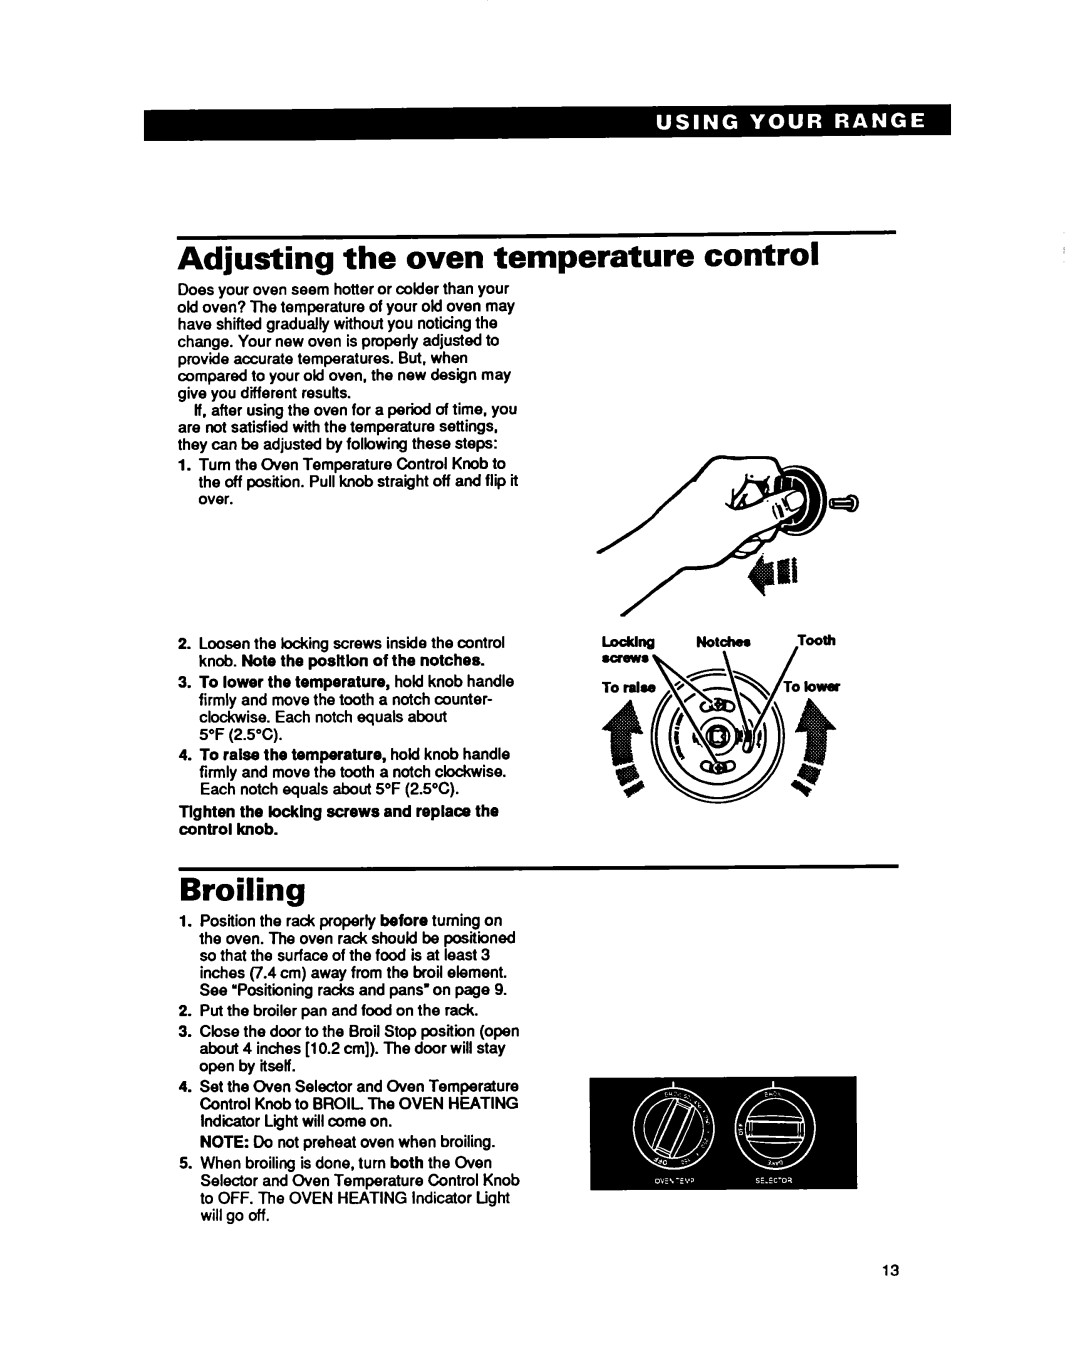 Whirlpool RF330PXY manual Adjusting the oven temperature control, Broiling 